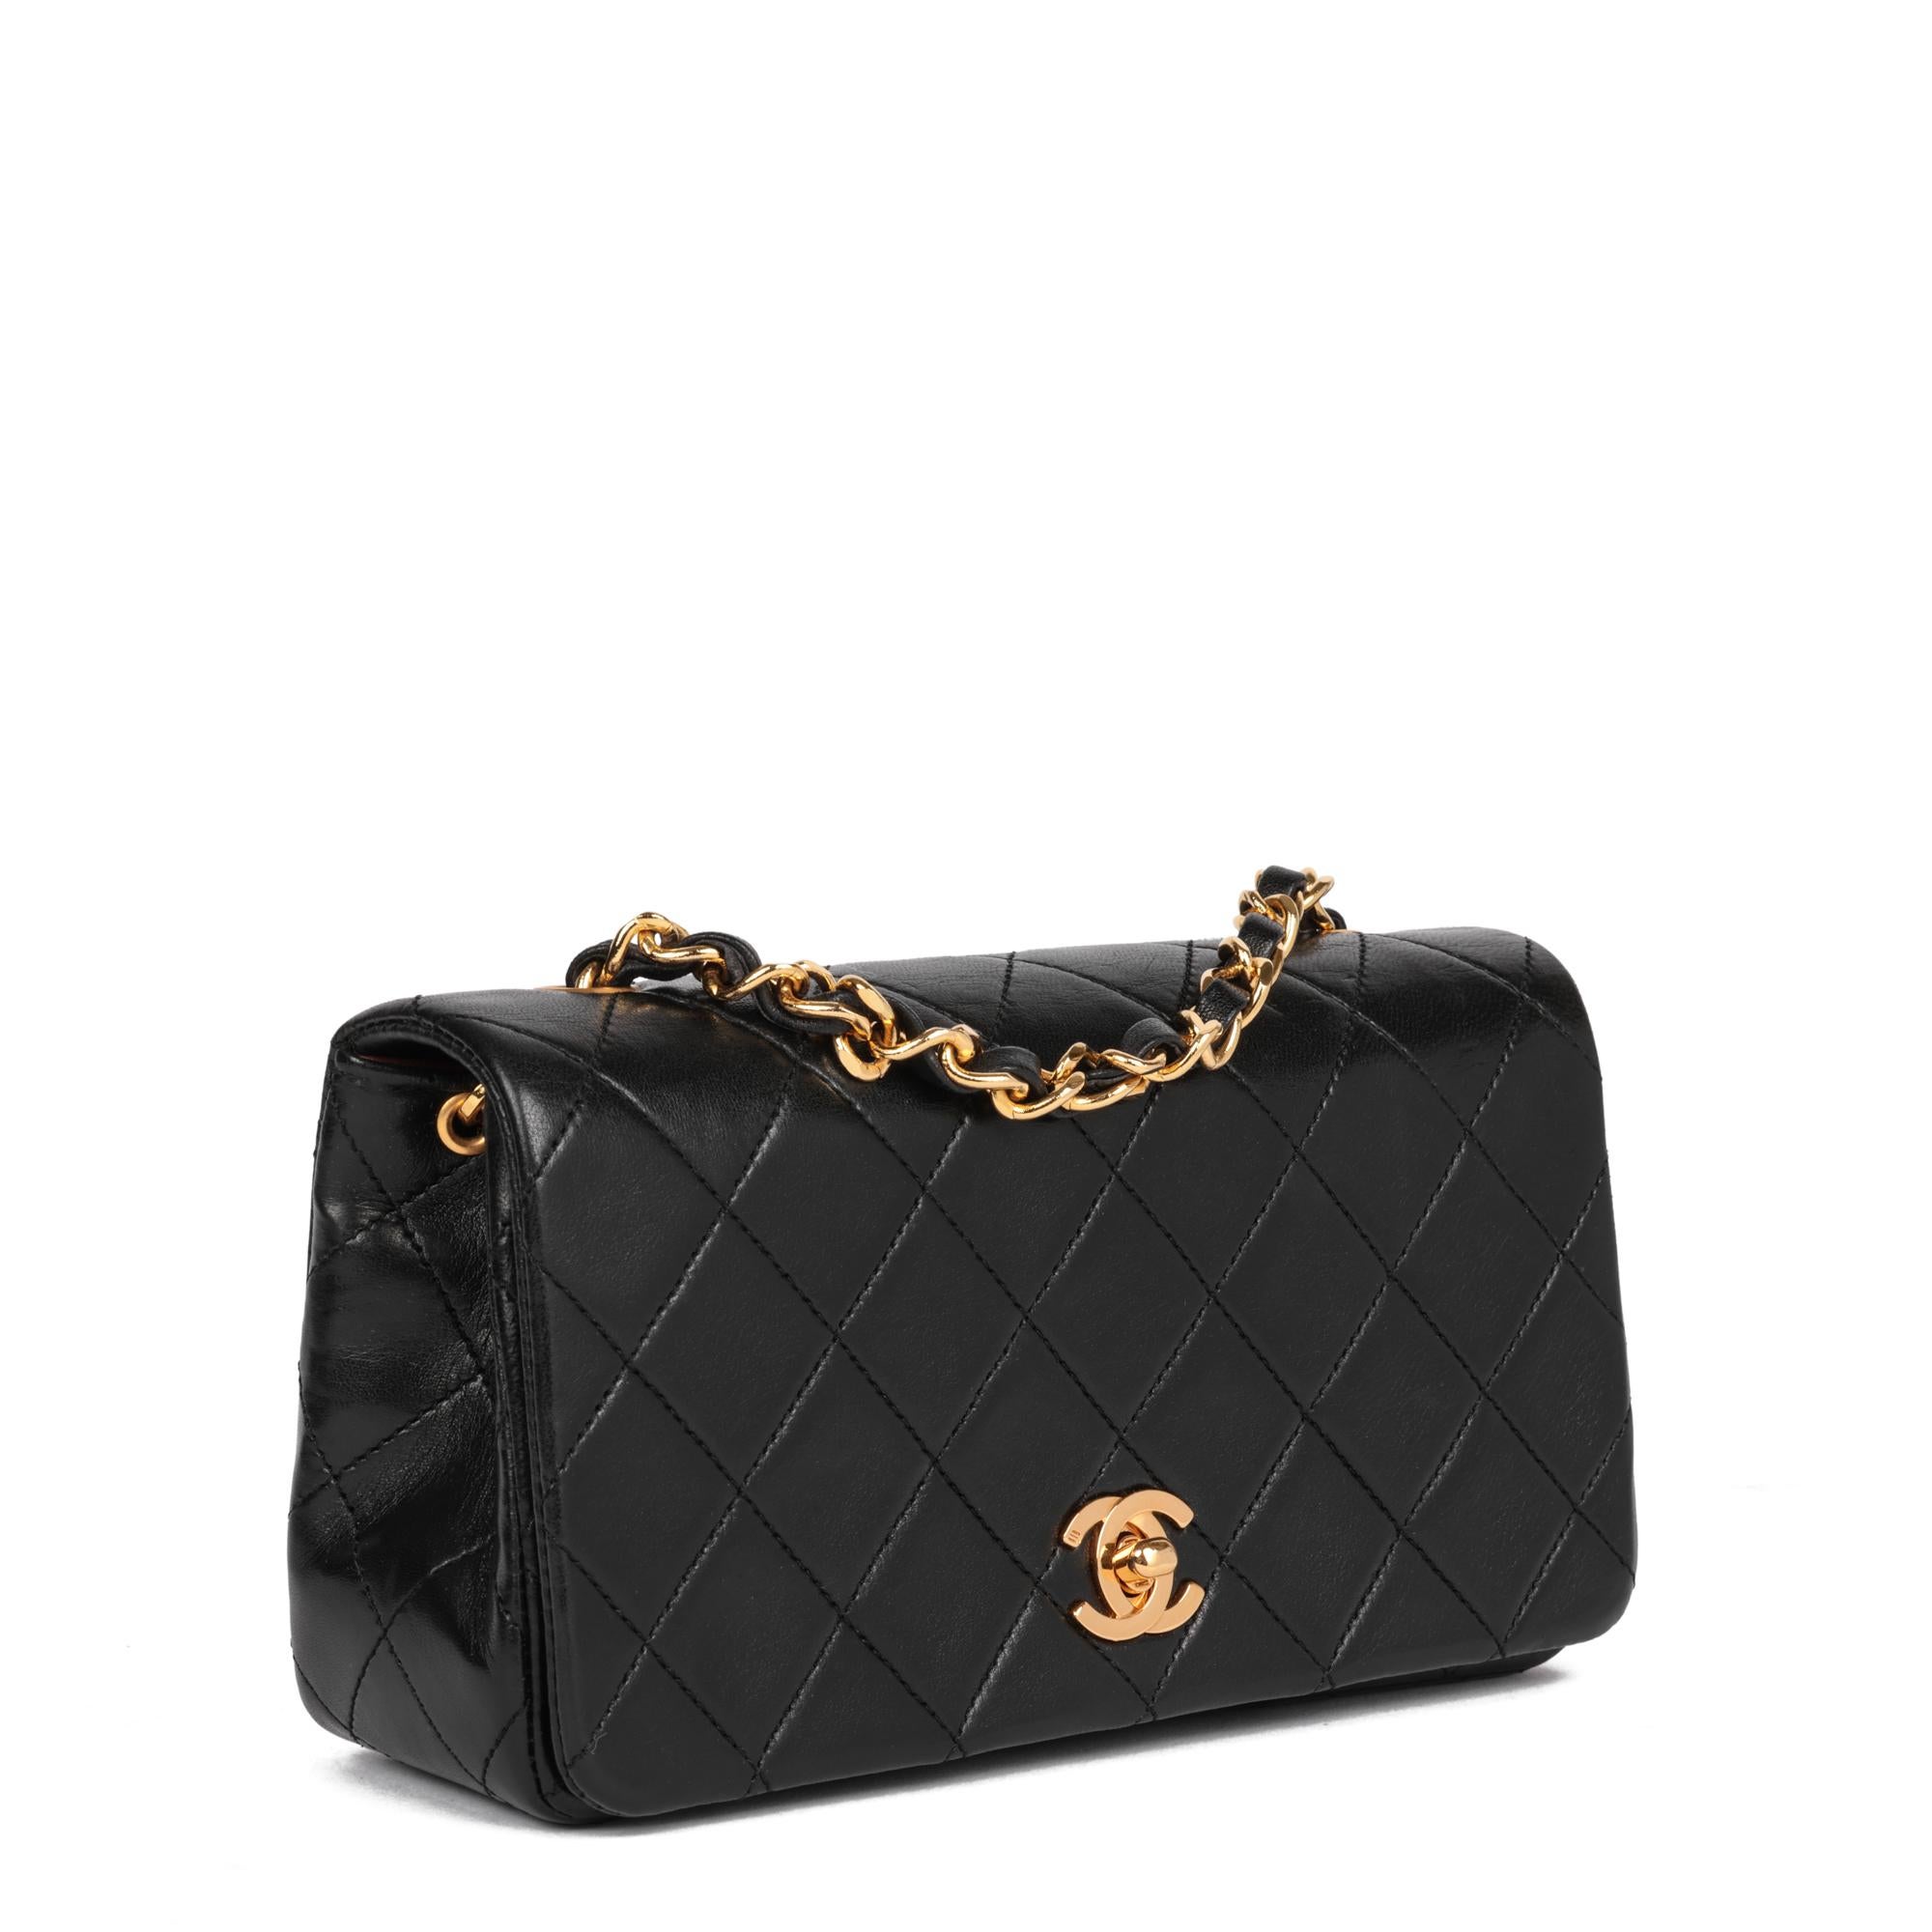 CHANEL
Black Quilted Lambskin Vintage Rectangular Mini Full Flap Bag

Xupes Reference: HB5179
Serial Number: 1620783
Age (Circa): 1990
Accompanied By: Chanel Dust Bag, Authenticity Card
Authenticity Details: Authenticity Card, Serial Sticker (Made